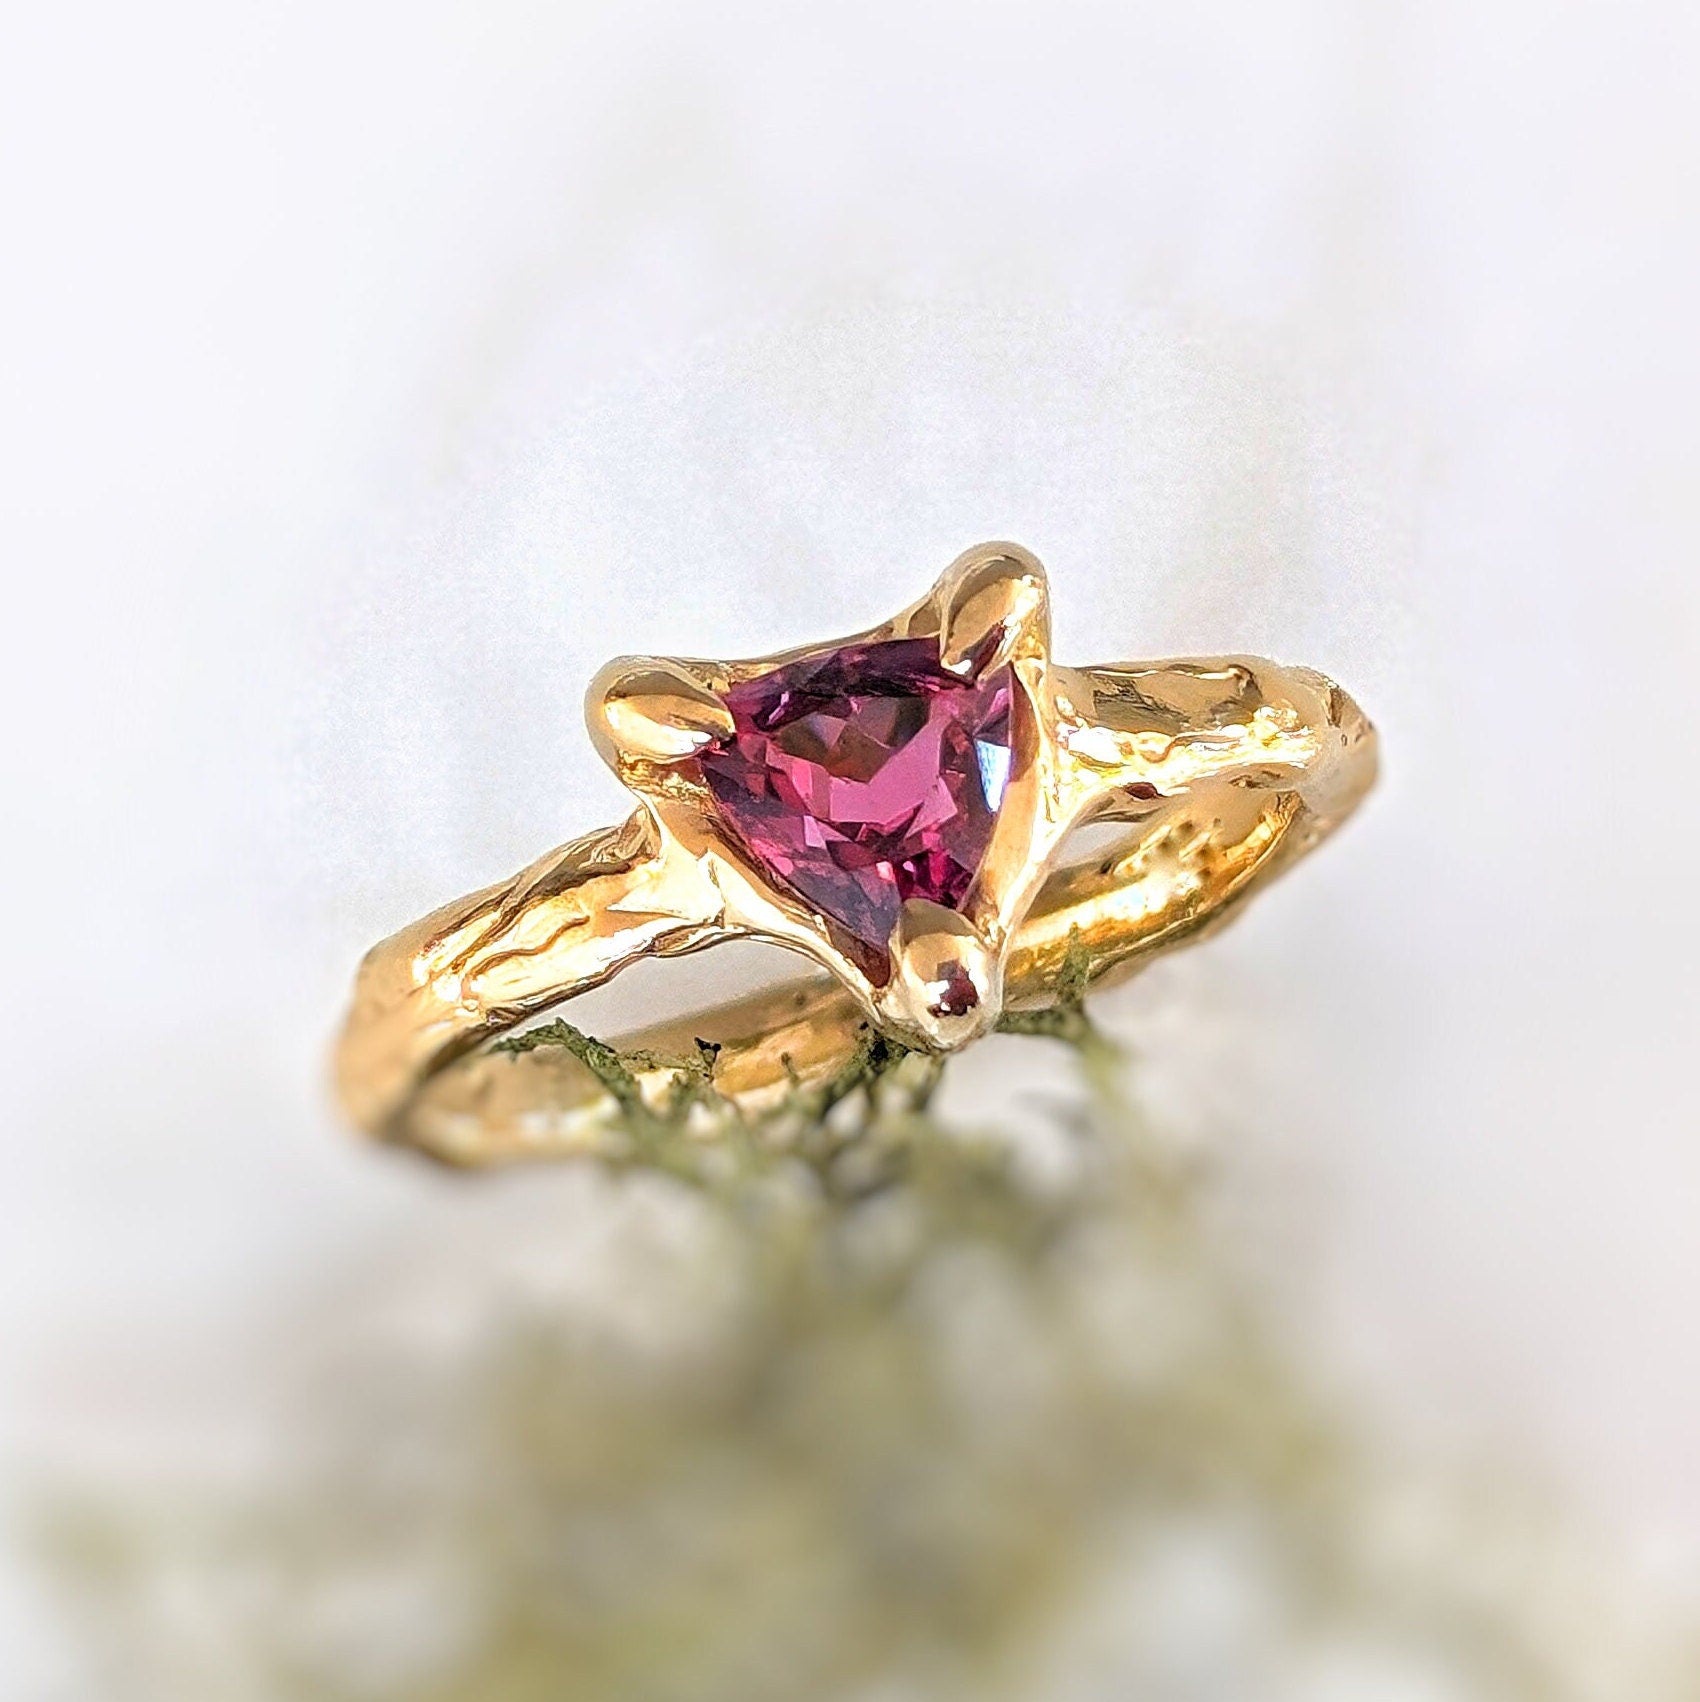 Trilliant shape Rubellite Tourmaline set by prongs on a textured Solid 14k Gold band